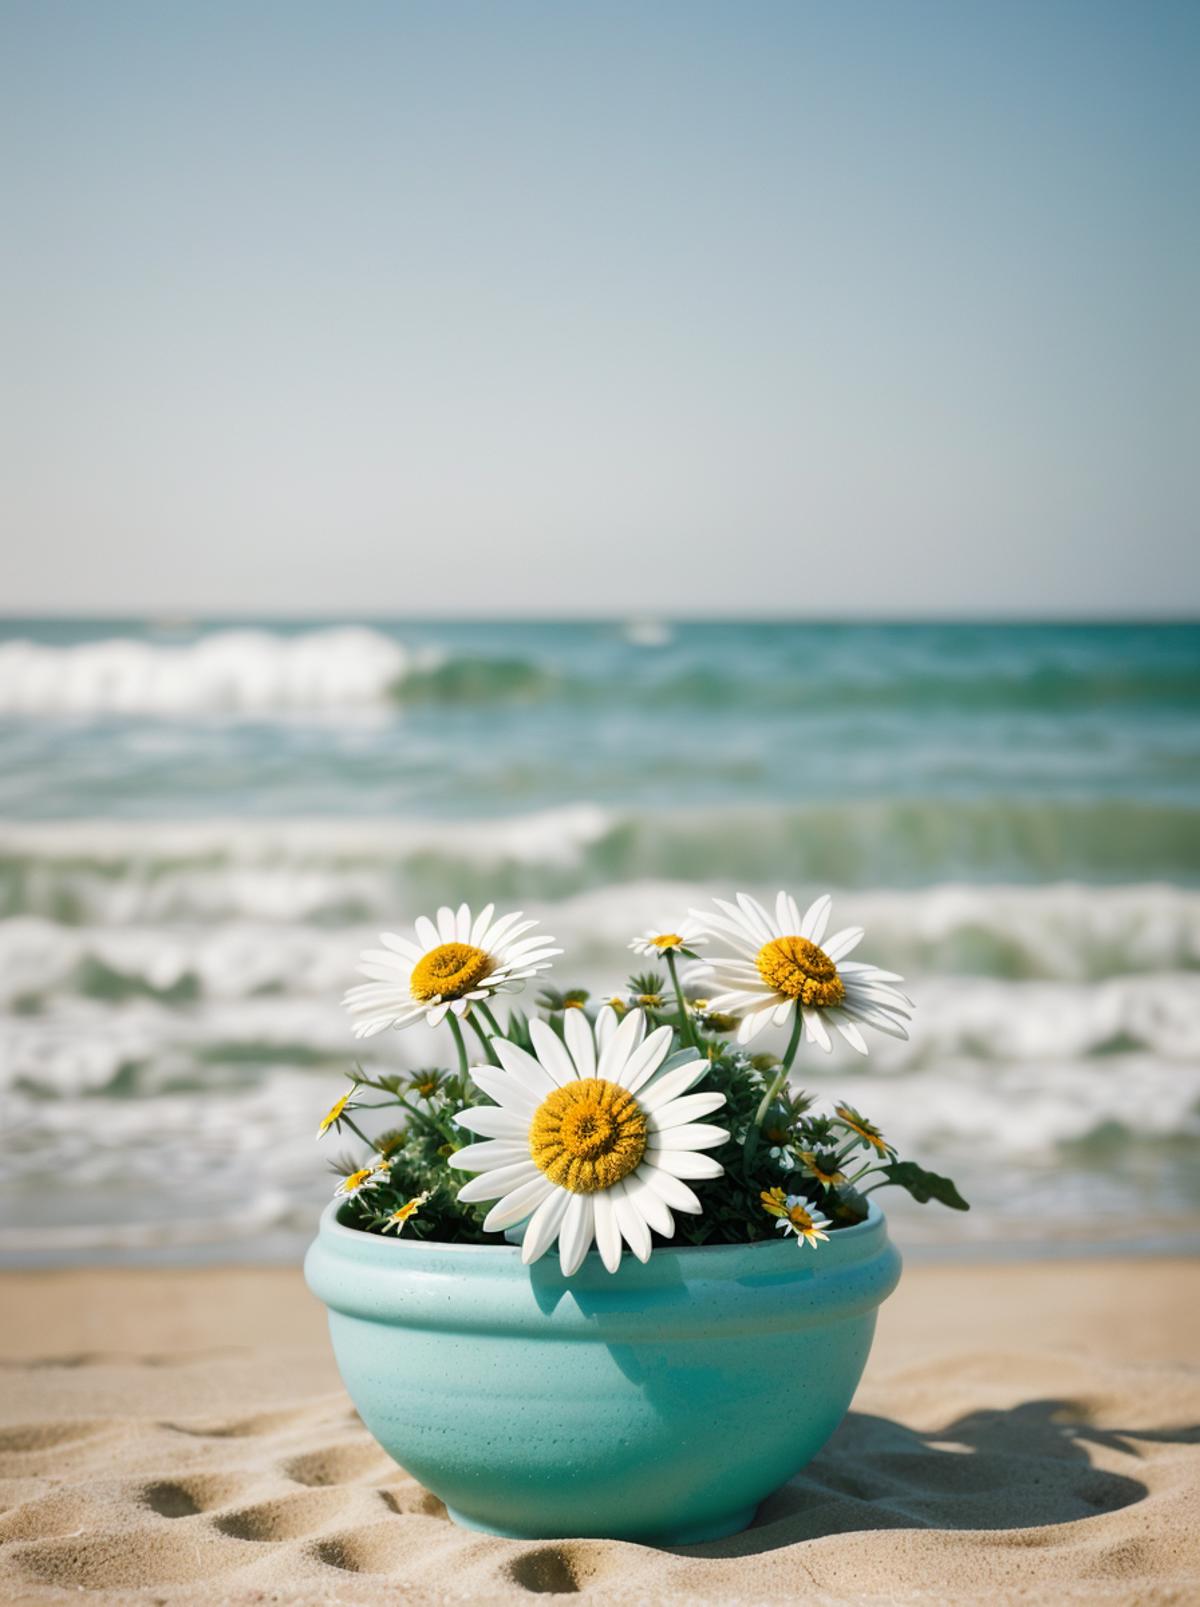 A blue vase filled with white and yellow flowers, placed on the beach.